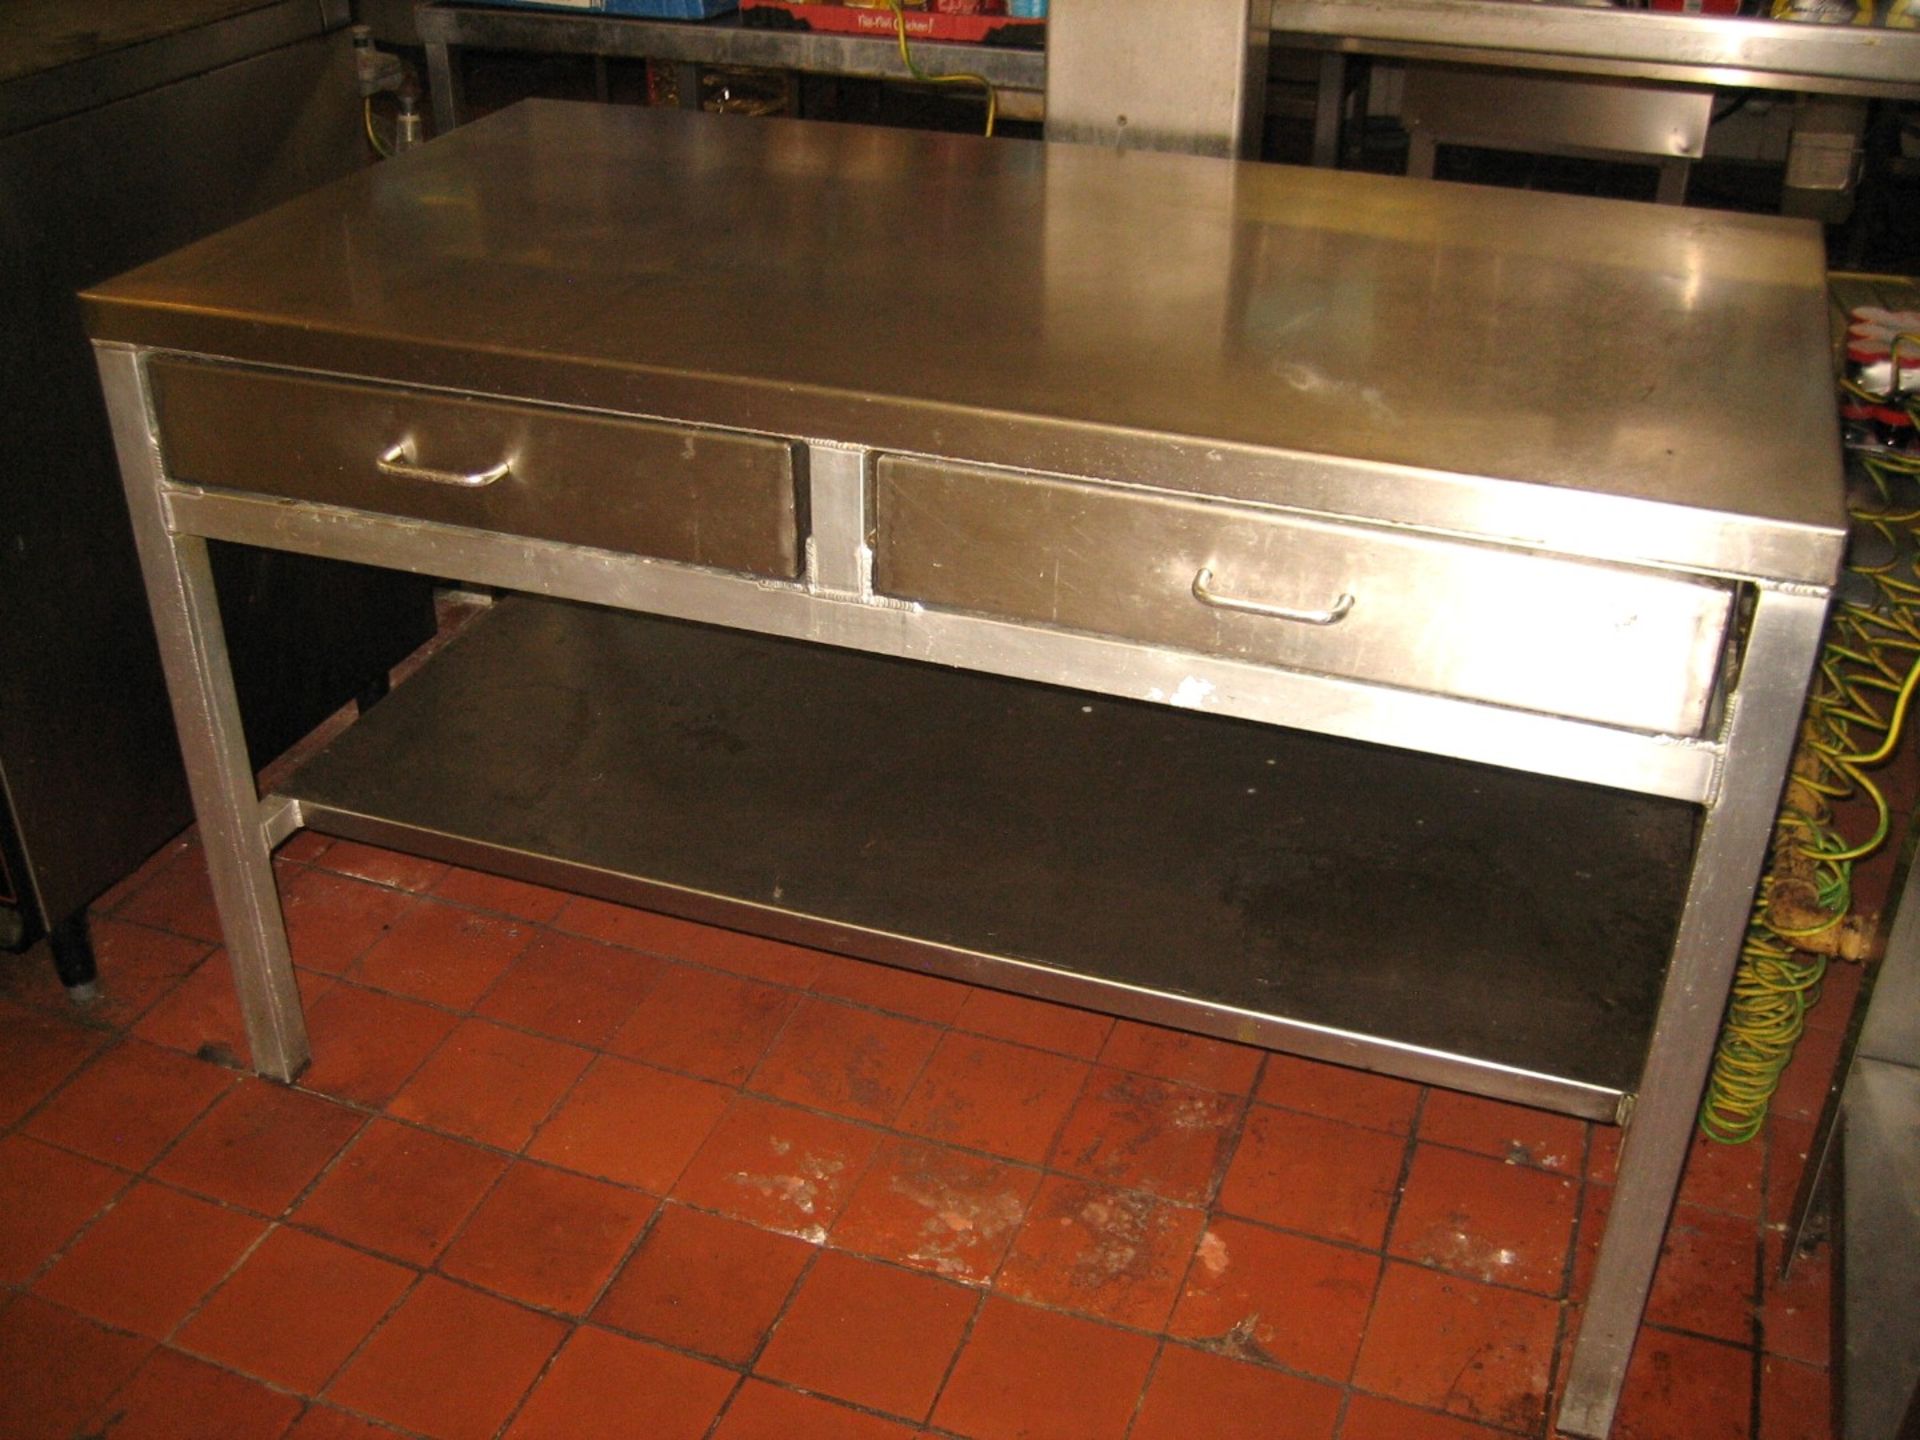 Stainless steel preparation table 2750mm x 690mm with 2 utensil drawers and shelf under (Lift out £